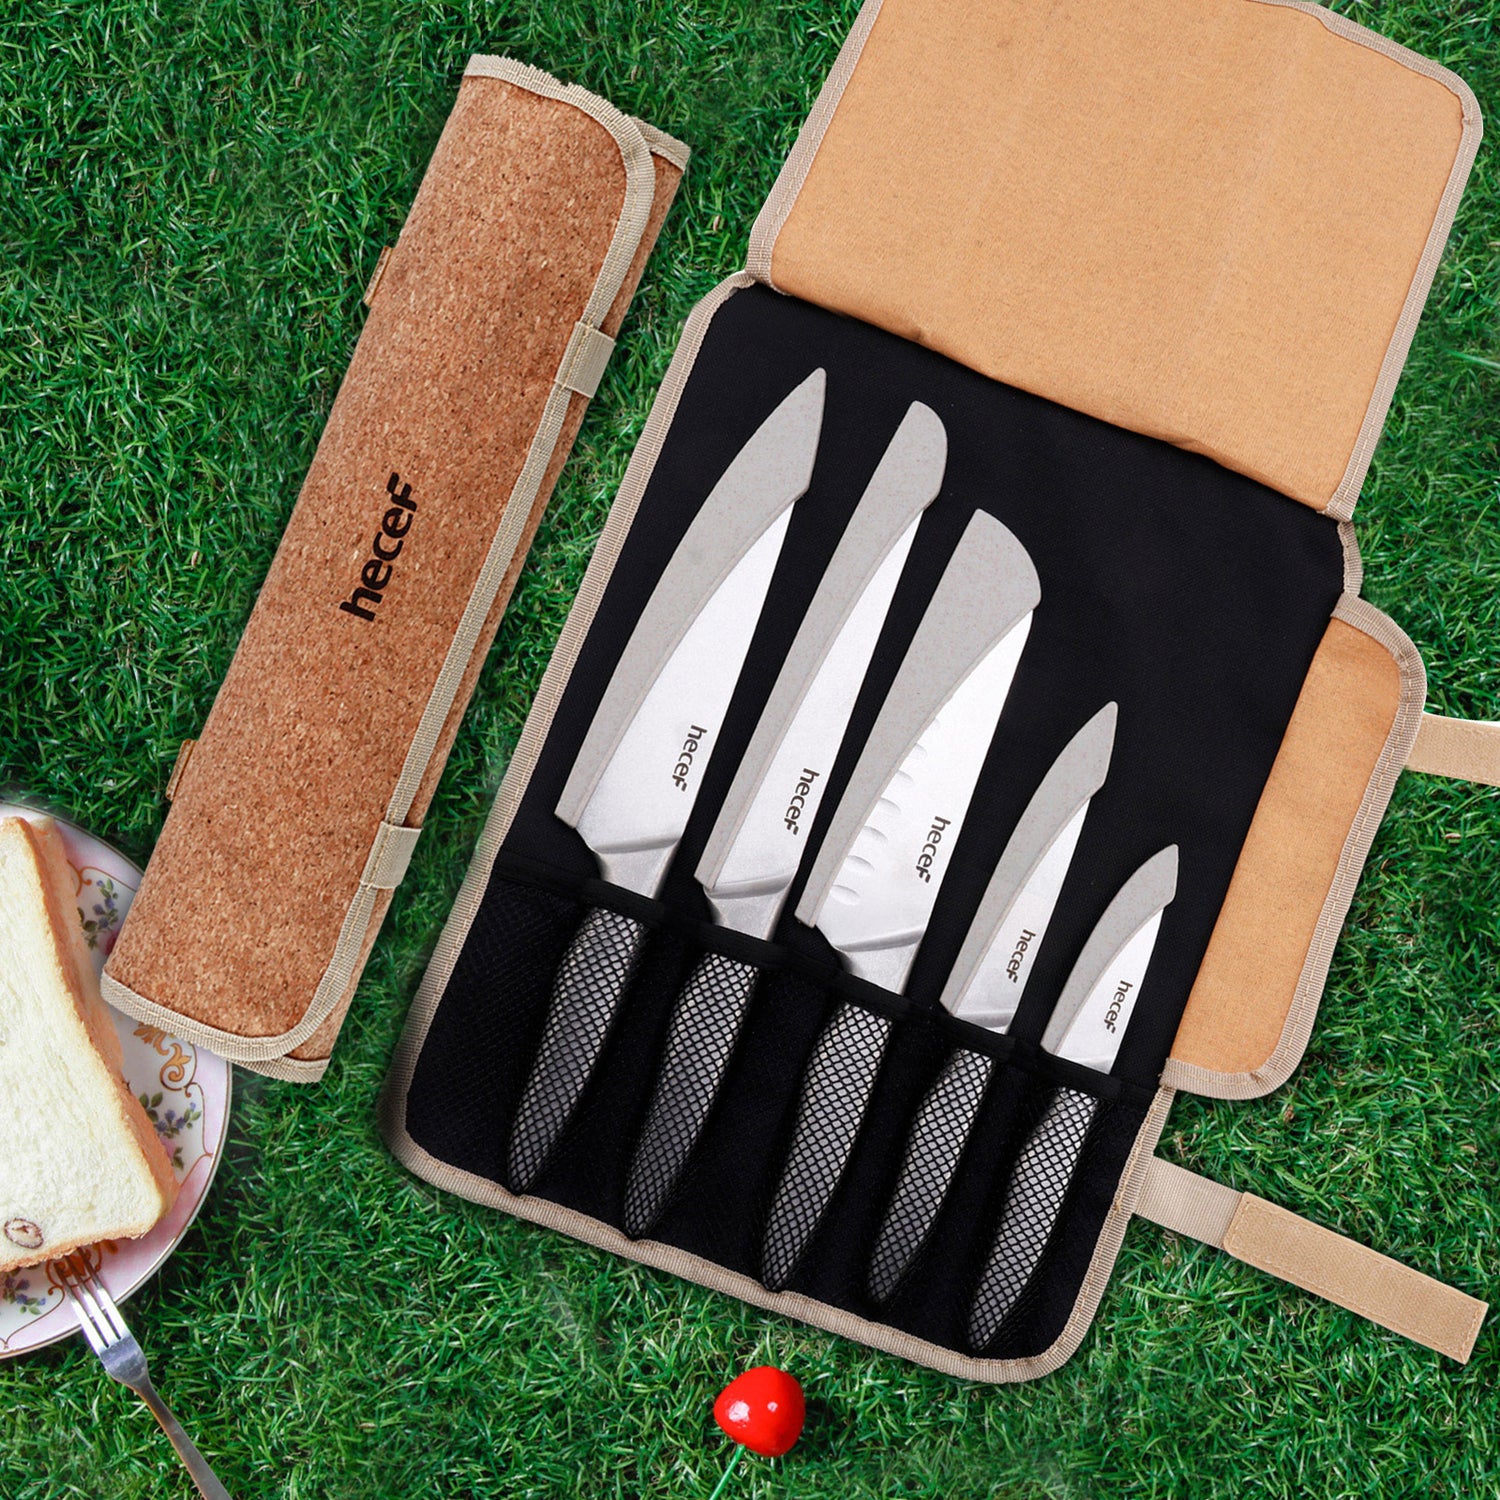 hecef Vintage Style Kitchen Knife Sets,Scratch Resistant Camping Matte Knives with 5 Slots Recycled Oxford Cloth Knife Roll Bag & Covers,Stonewashed High Carbon Stainless Steel Blades & Hollow Handle - Hecef Kitchen